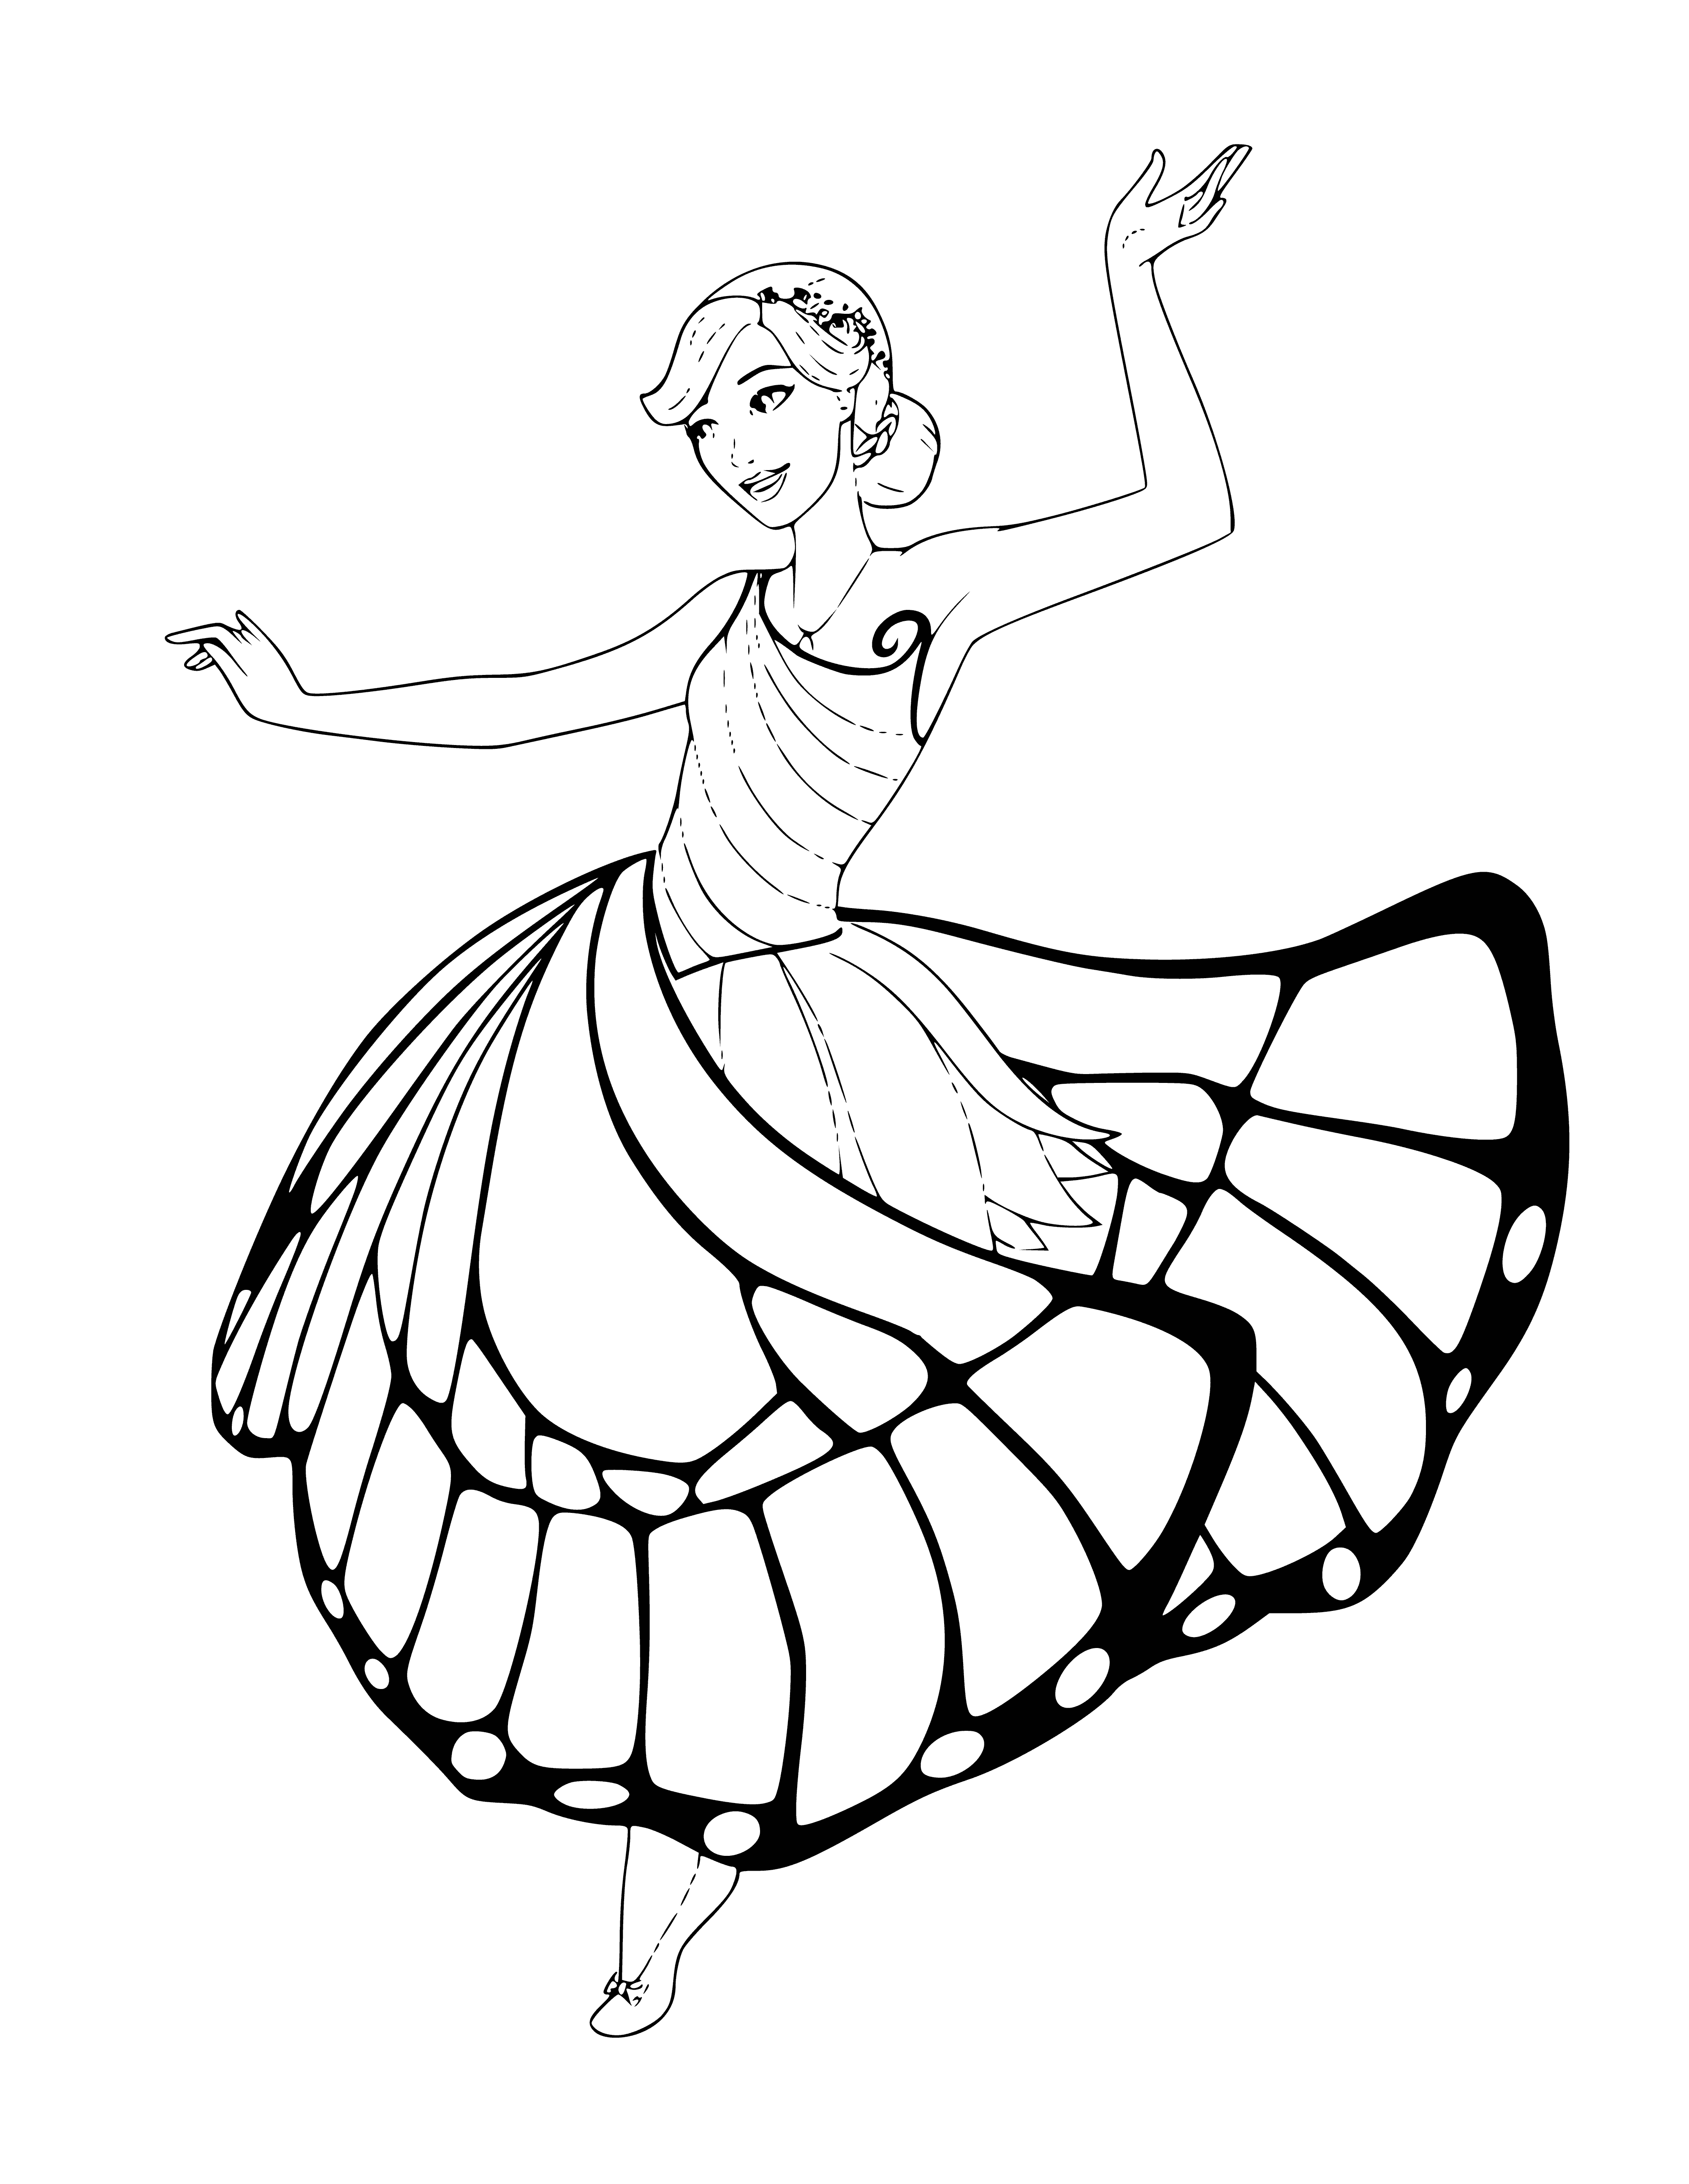 coloring page: Fairy Boabchka dances in a purple dress, yellow belt and shoes, with purple wings and a yellow wand, blonde curly hair.